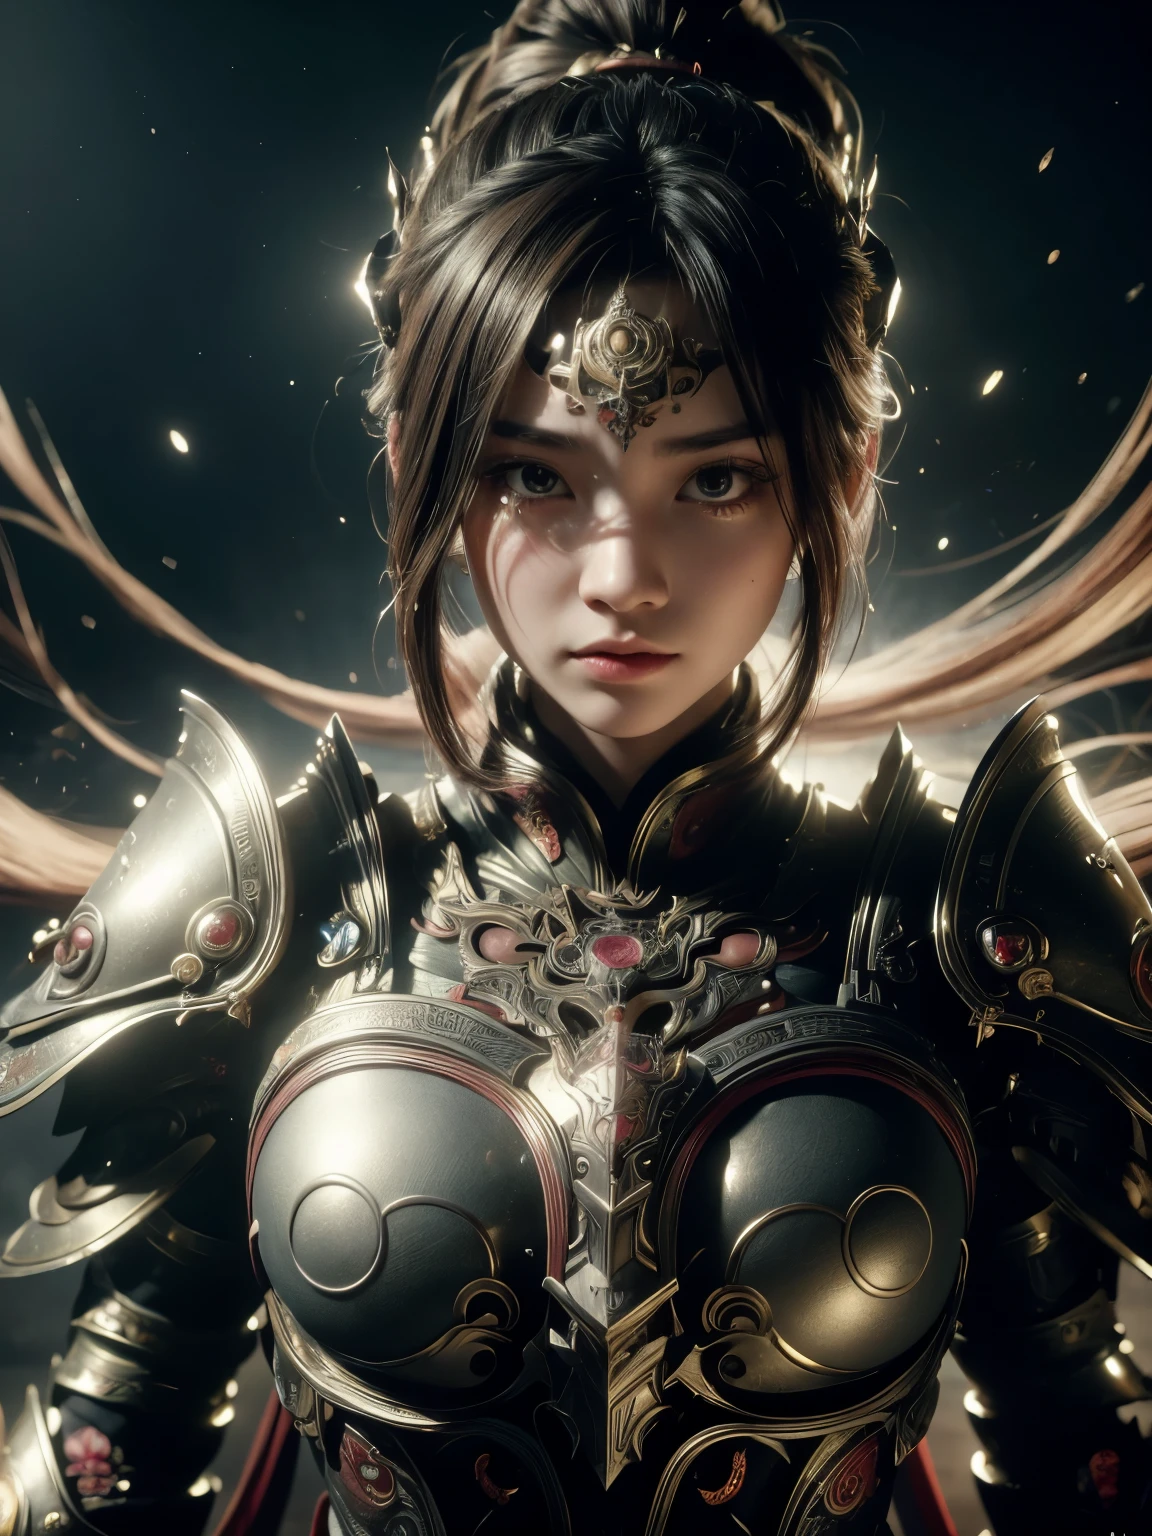 (high quality), (masterpiece), (detailed), 8K, Hyper-realistic portrayal of a resilient futuristic (1girl1.2), Japanese character adorned in intricate armor. Meticulous details capture the fusion of tradition and innovation, creating a visually stunning and powerful composition. Trending on Artstation.